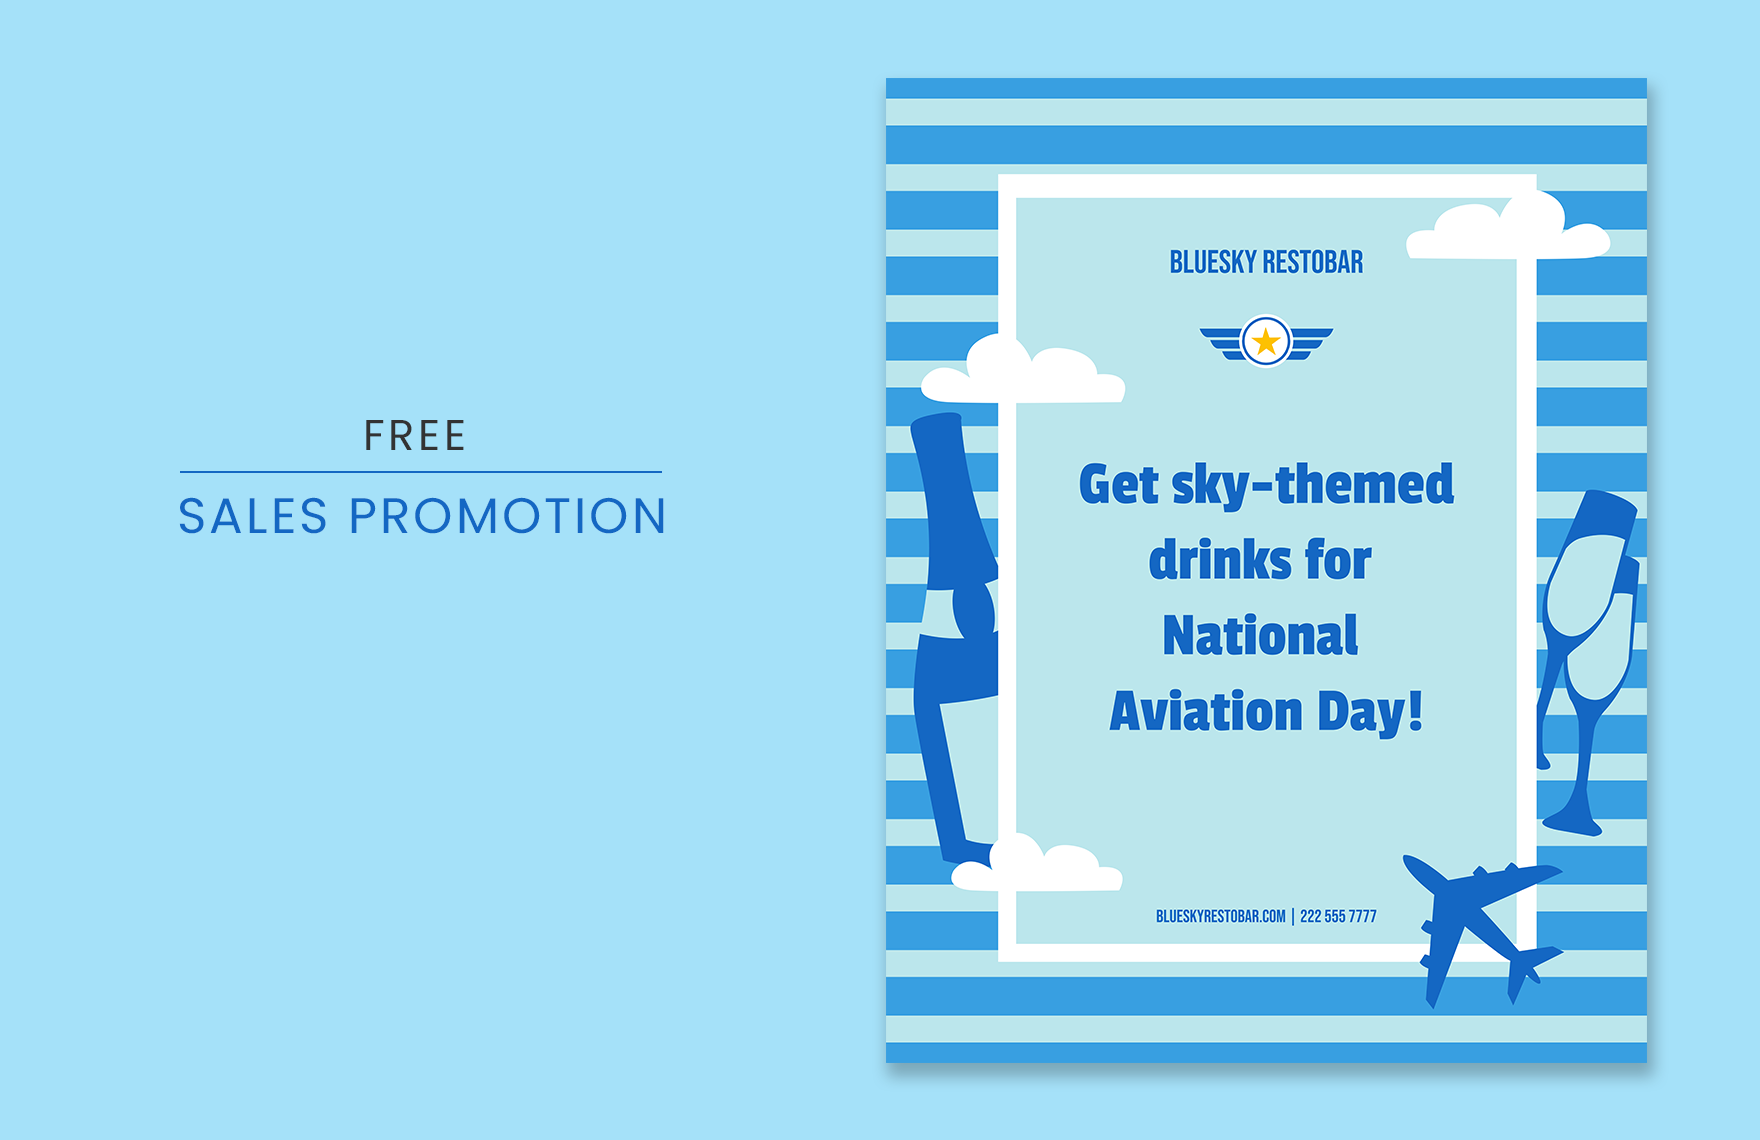 Free National Aviation Day Sales Promotion Template in PDF, Illustrator, SVG, PNG